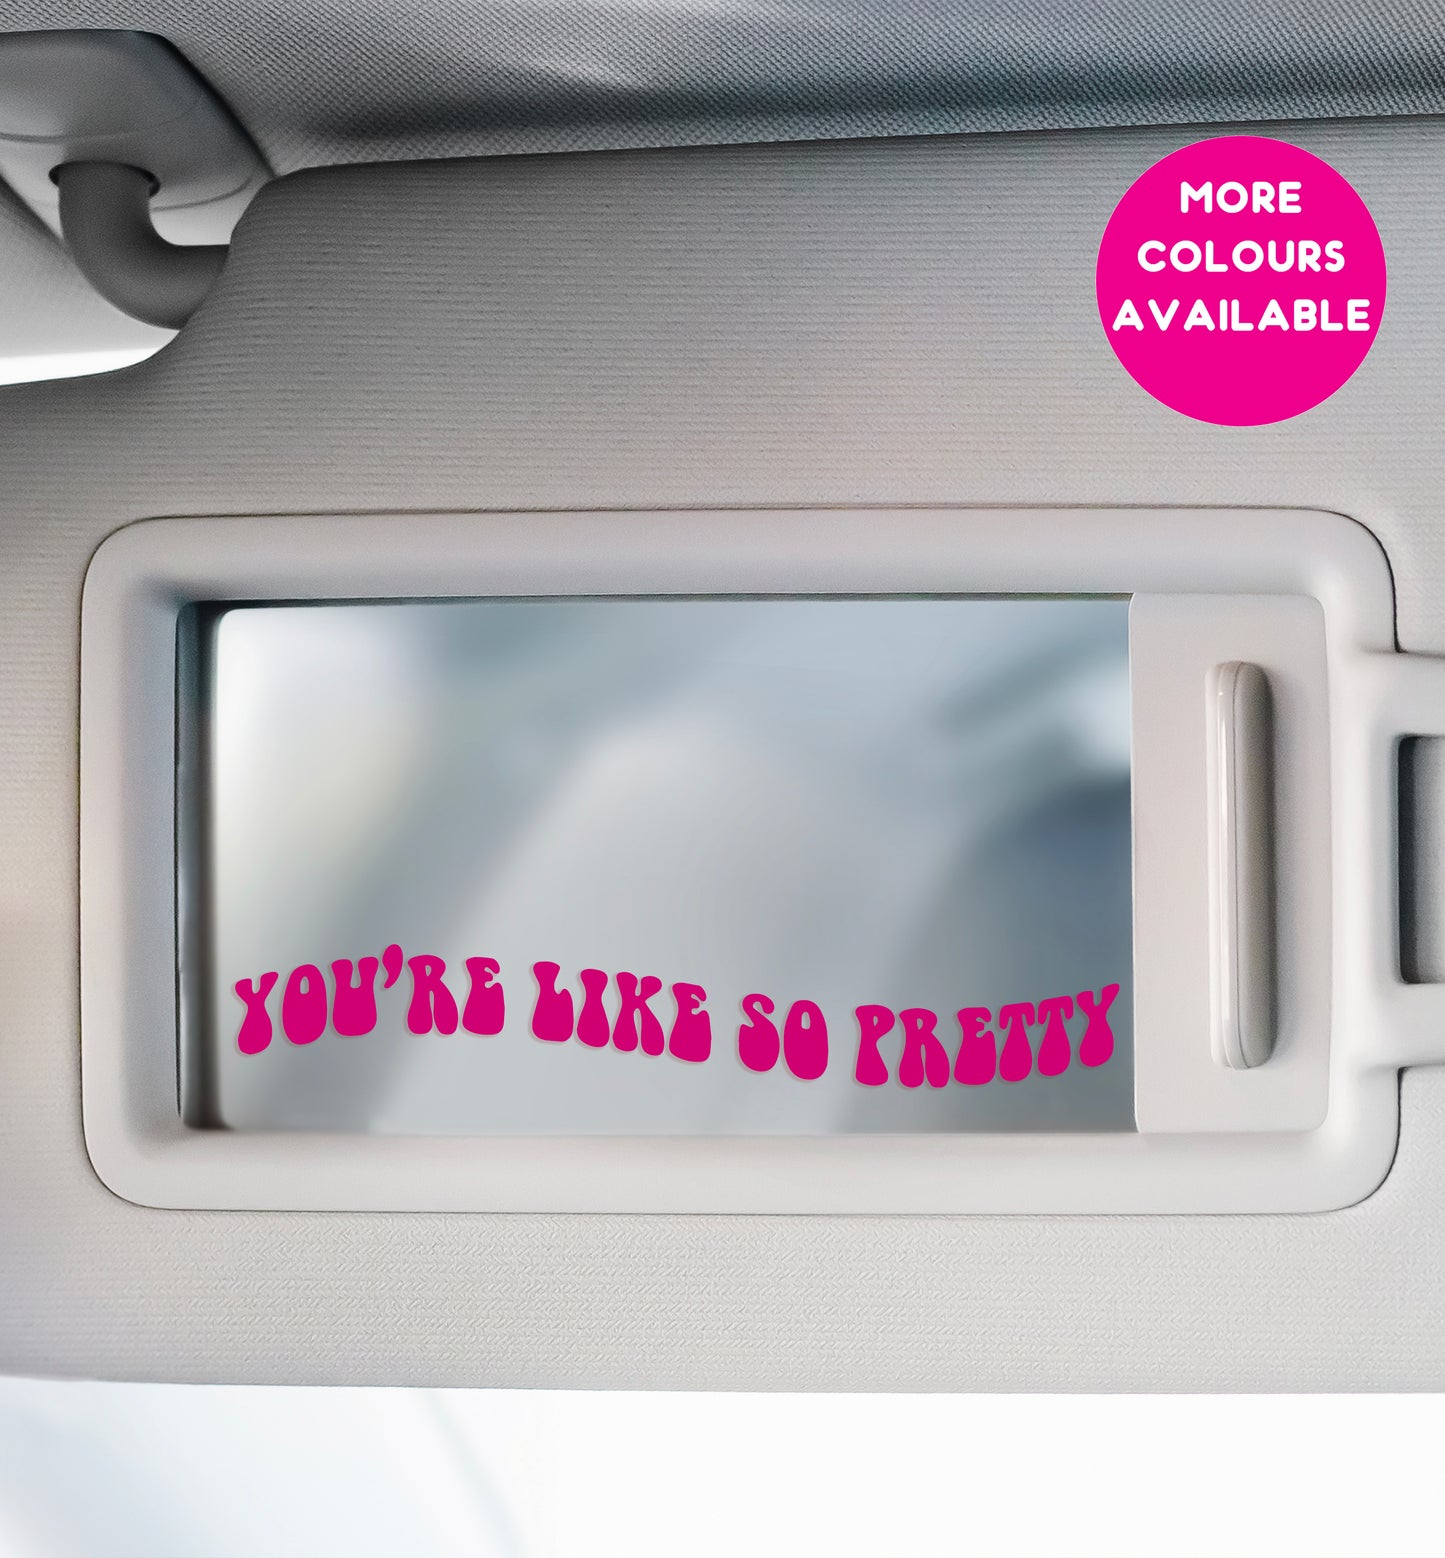 You're like so pretty car vanity mirror car decal various colours